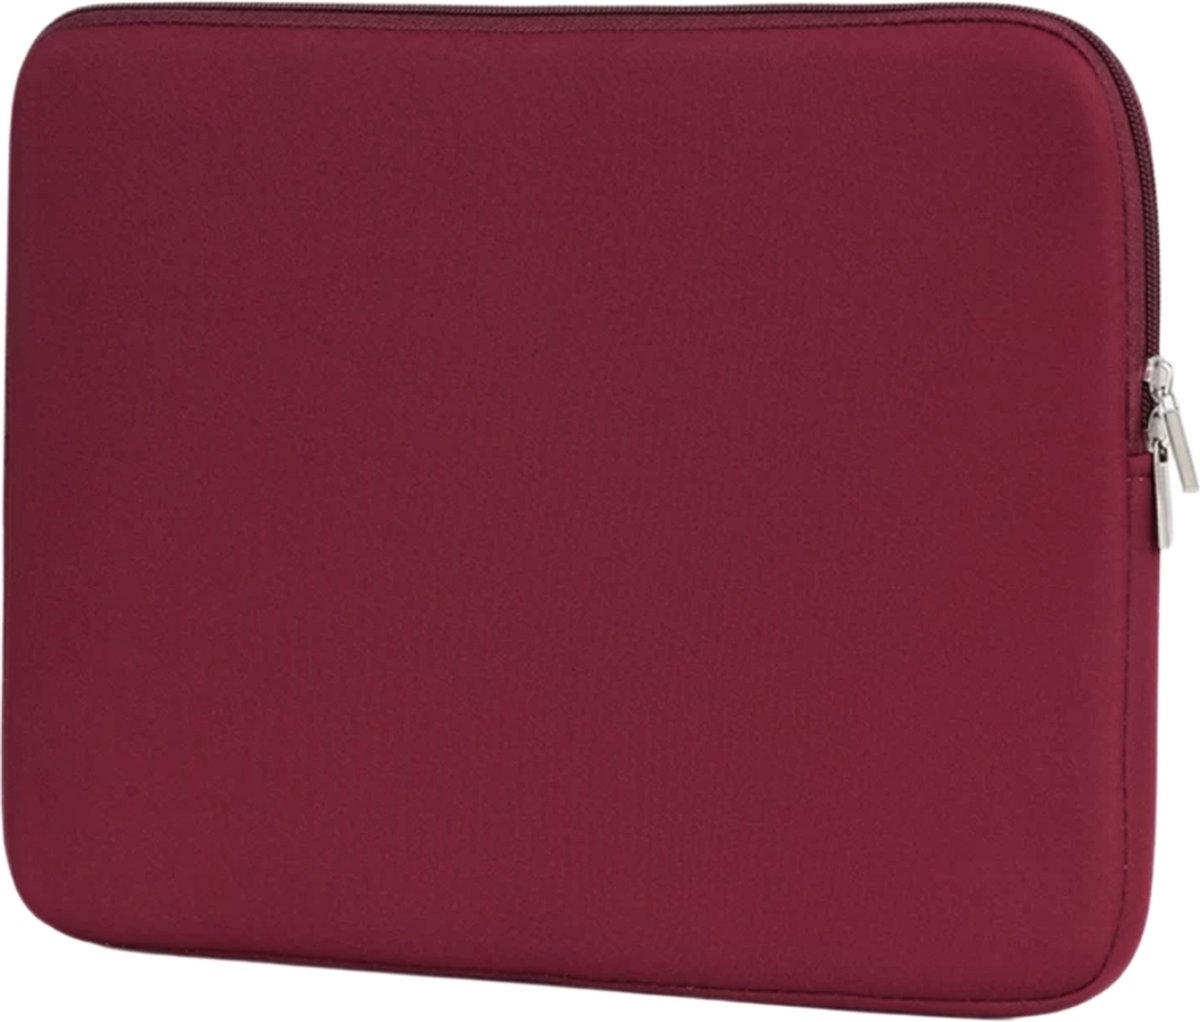 Sleeve – laptophoes – extra bescherming – 14,6 inch – bordeaux rood - Ultra Licht - Dubbele Ritssluiting